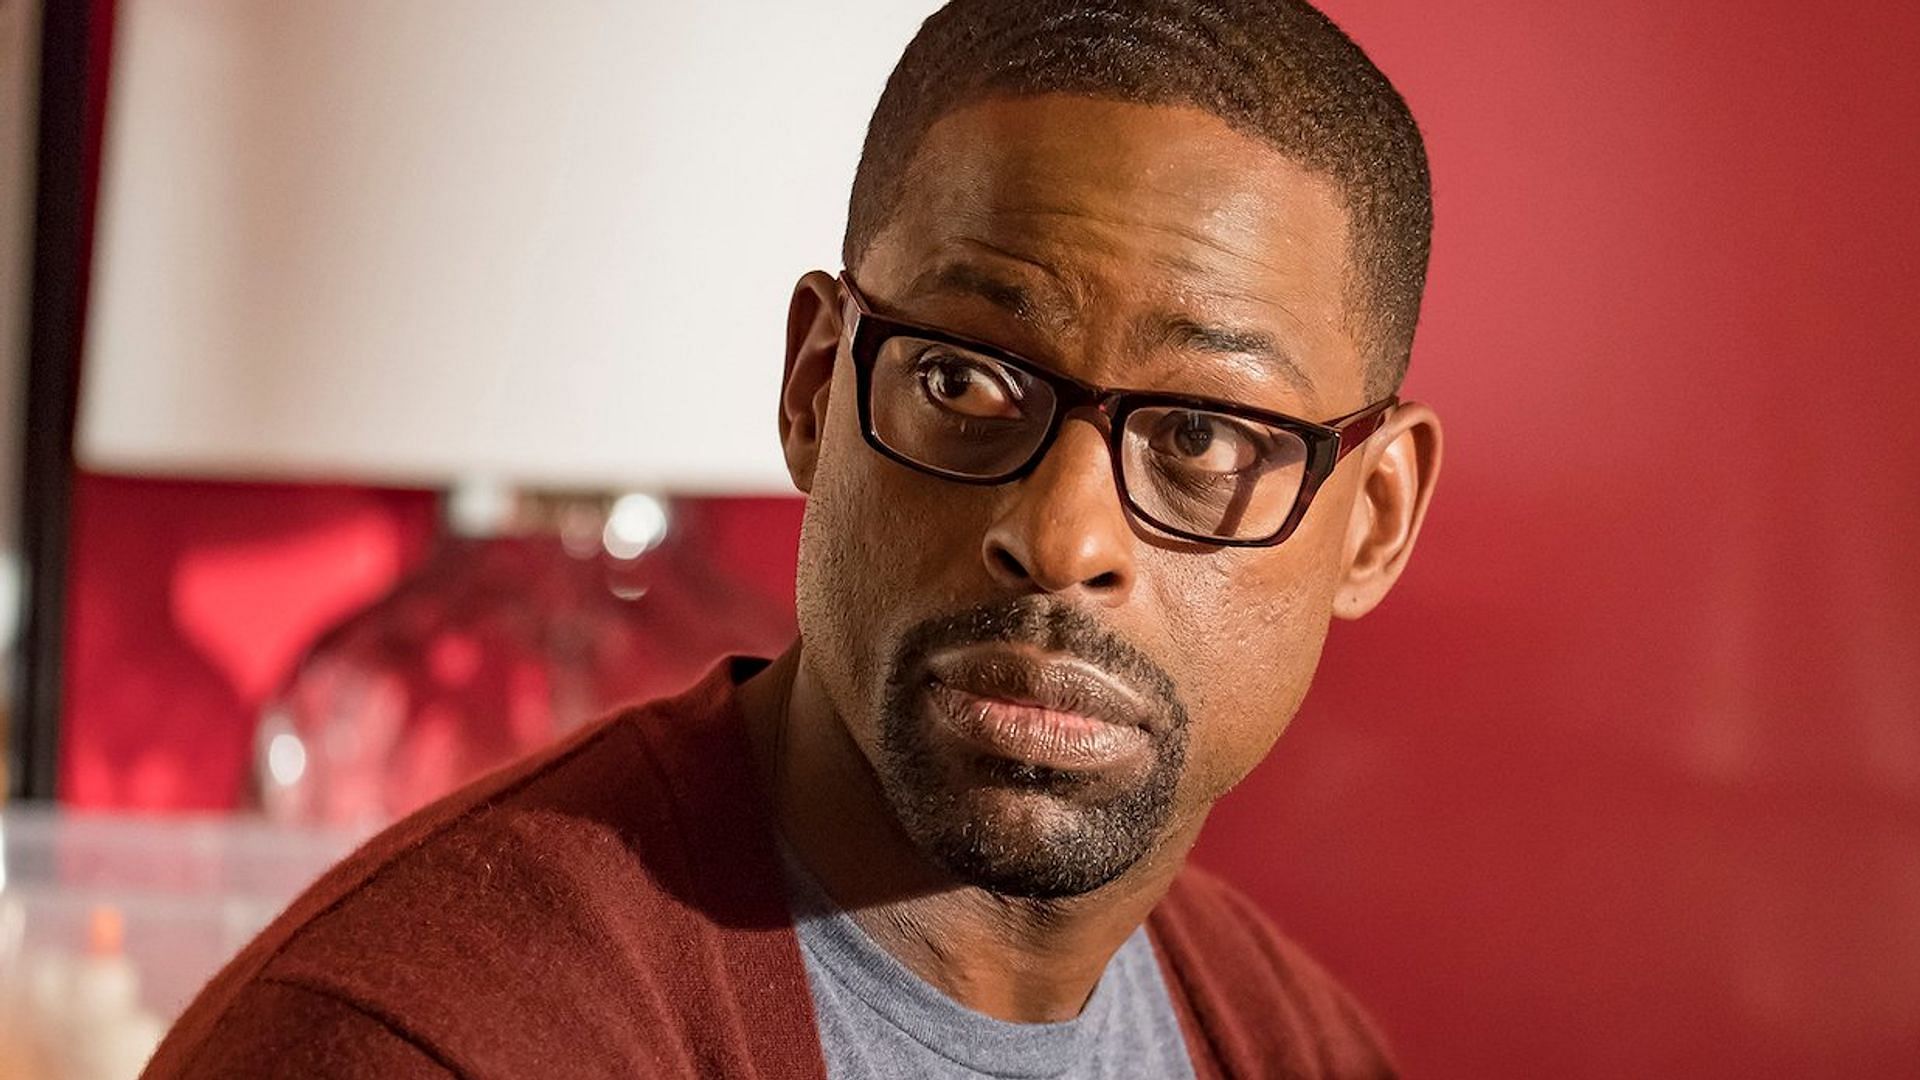  A still from NBC&#039;s This Is Us - Randall Pearson (Image via NBC)